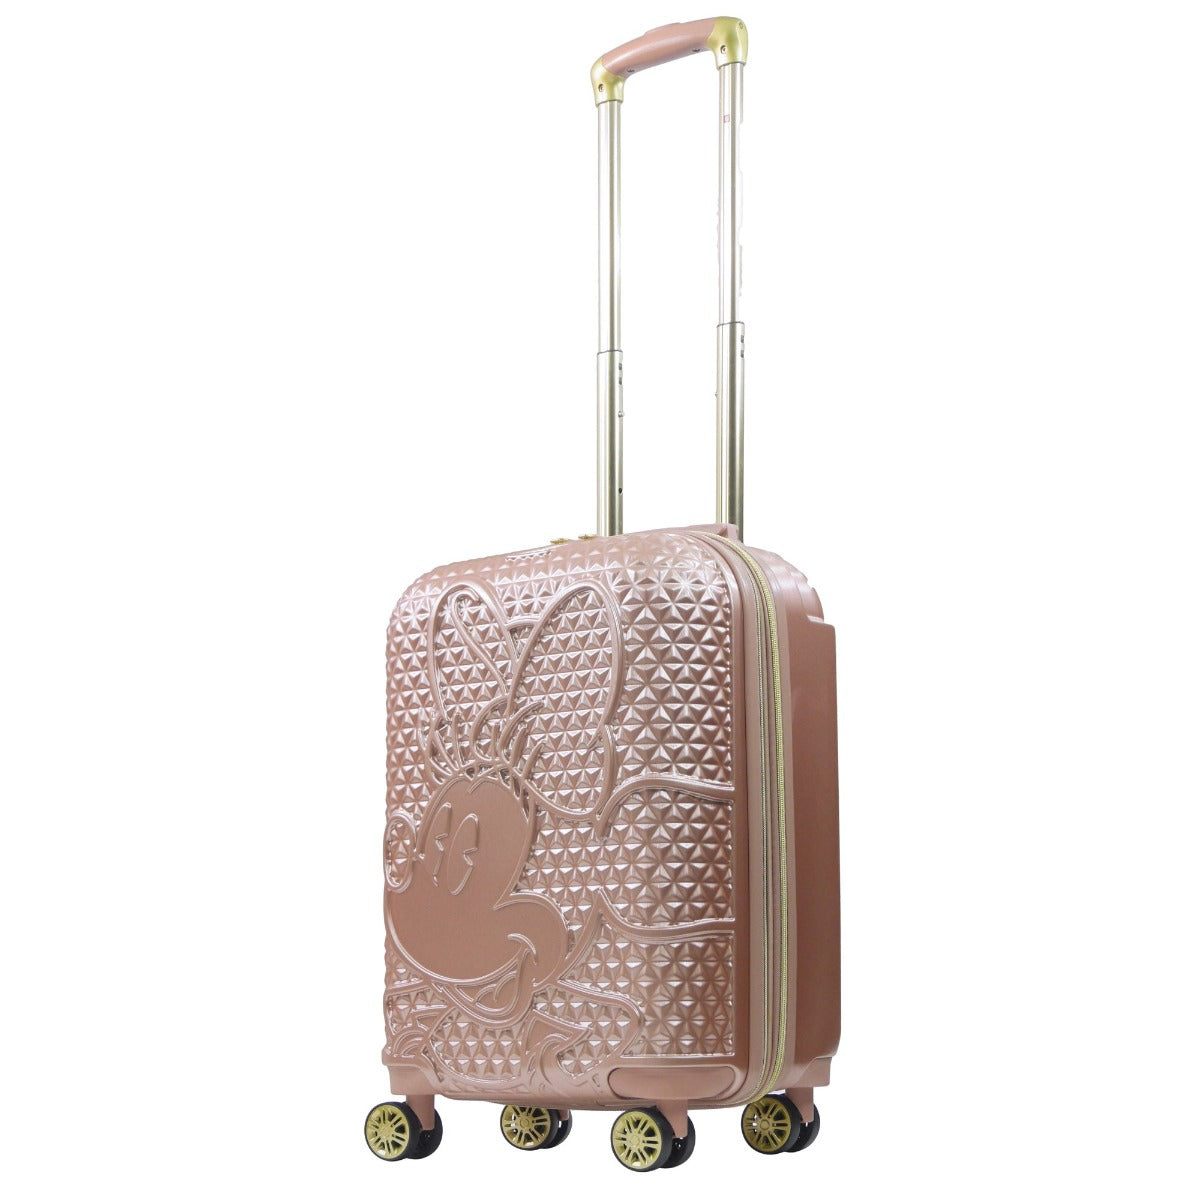 Ful Disney Minnie Mouse 22.5" luggage spinner rose gold - best hard suitcase for travel